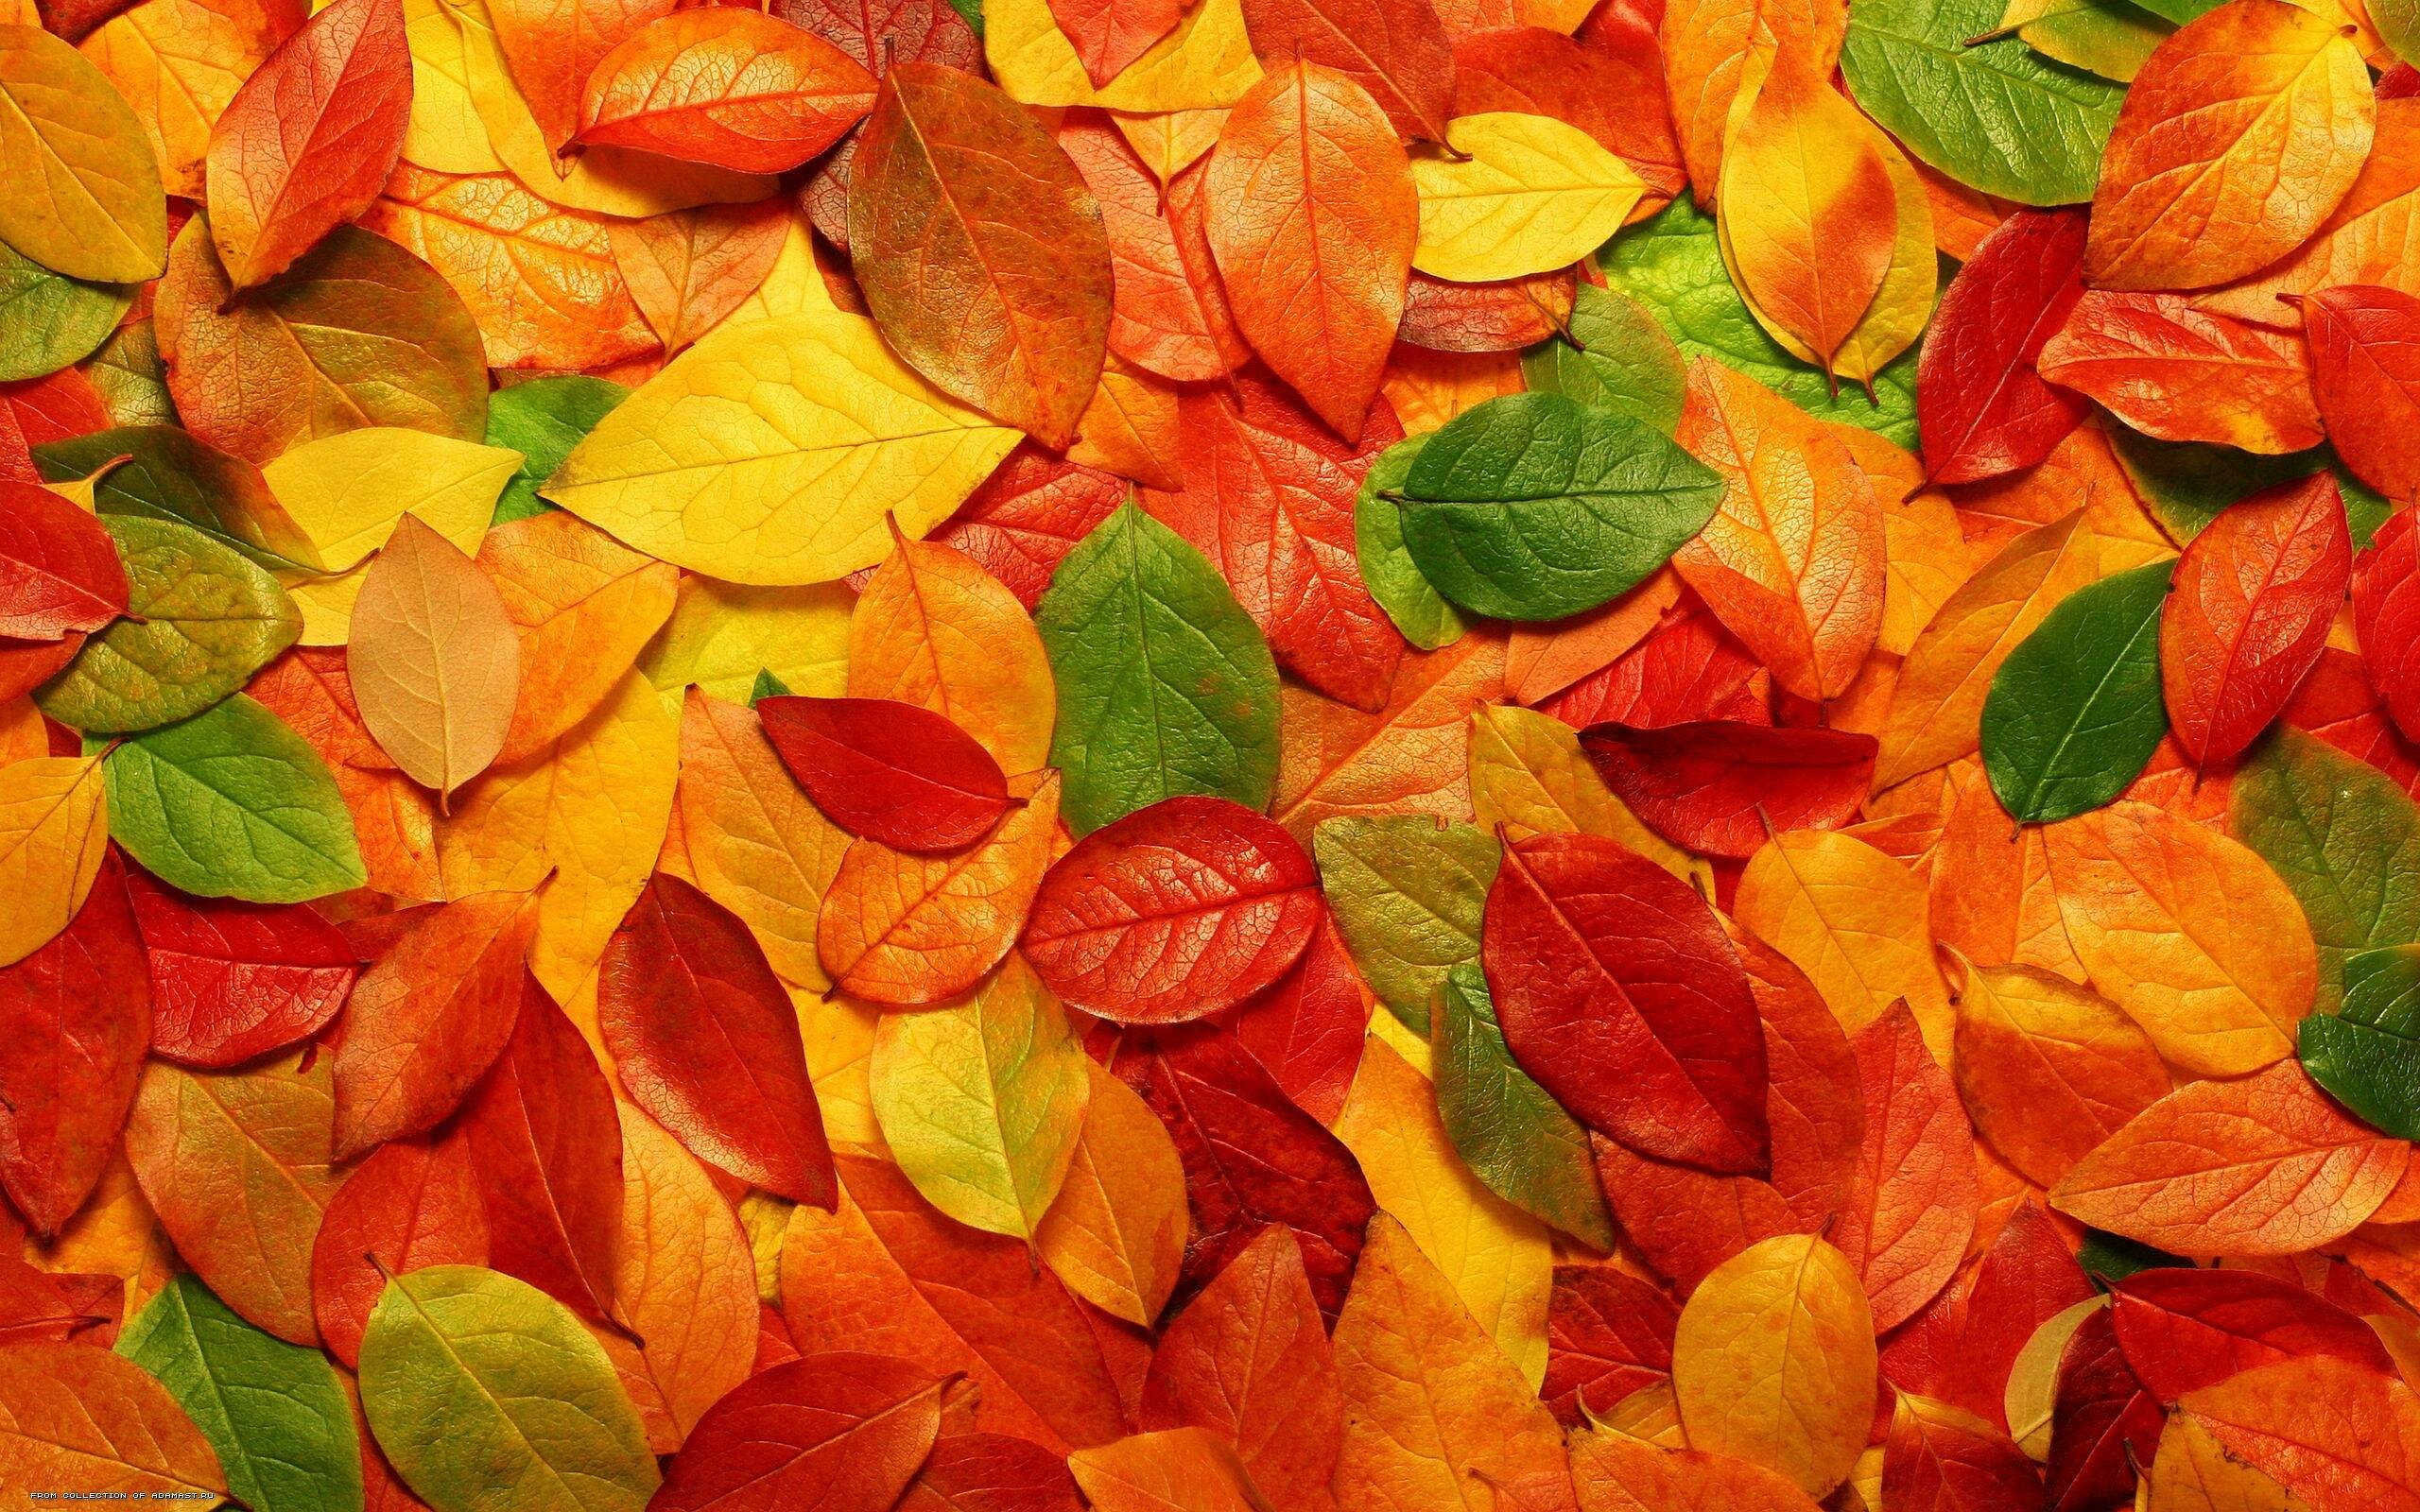 Leaf: Autumn, Blade is the broad portion, which is also referred to as the lamina. 2560x1600 HD Wallpaper.